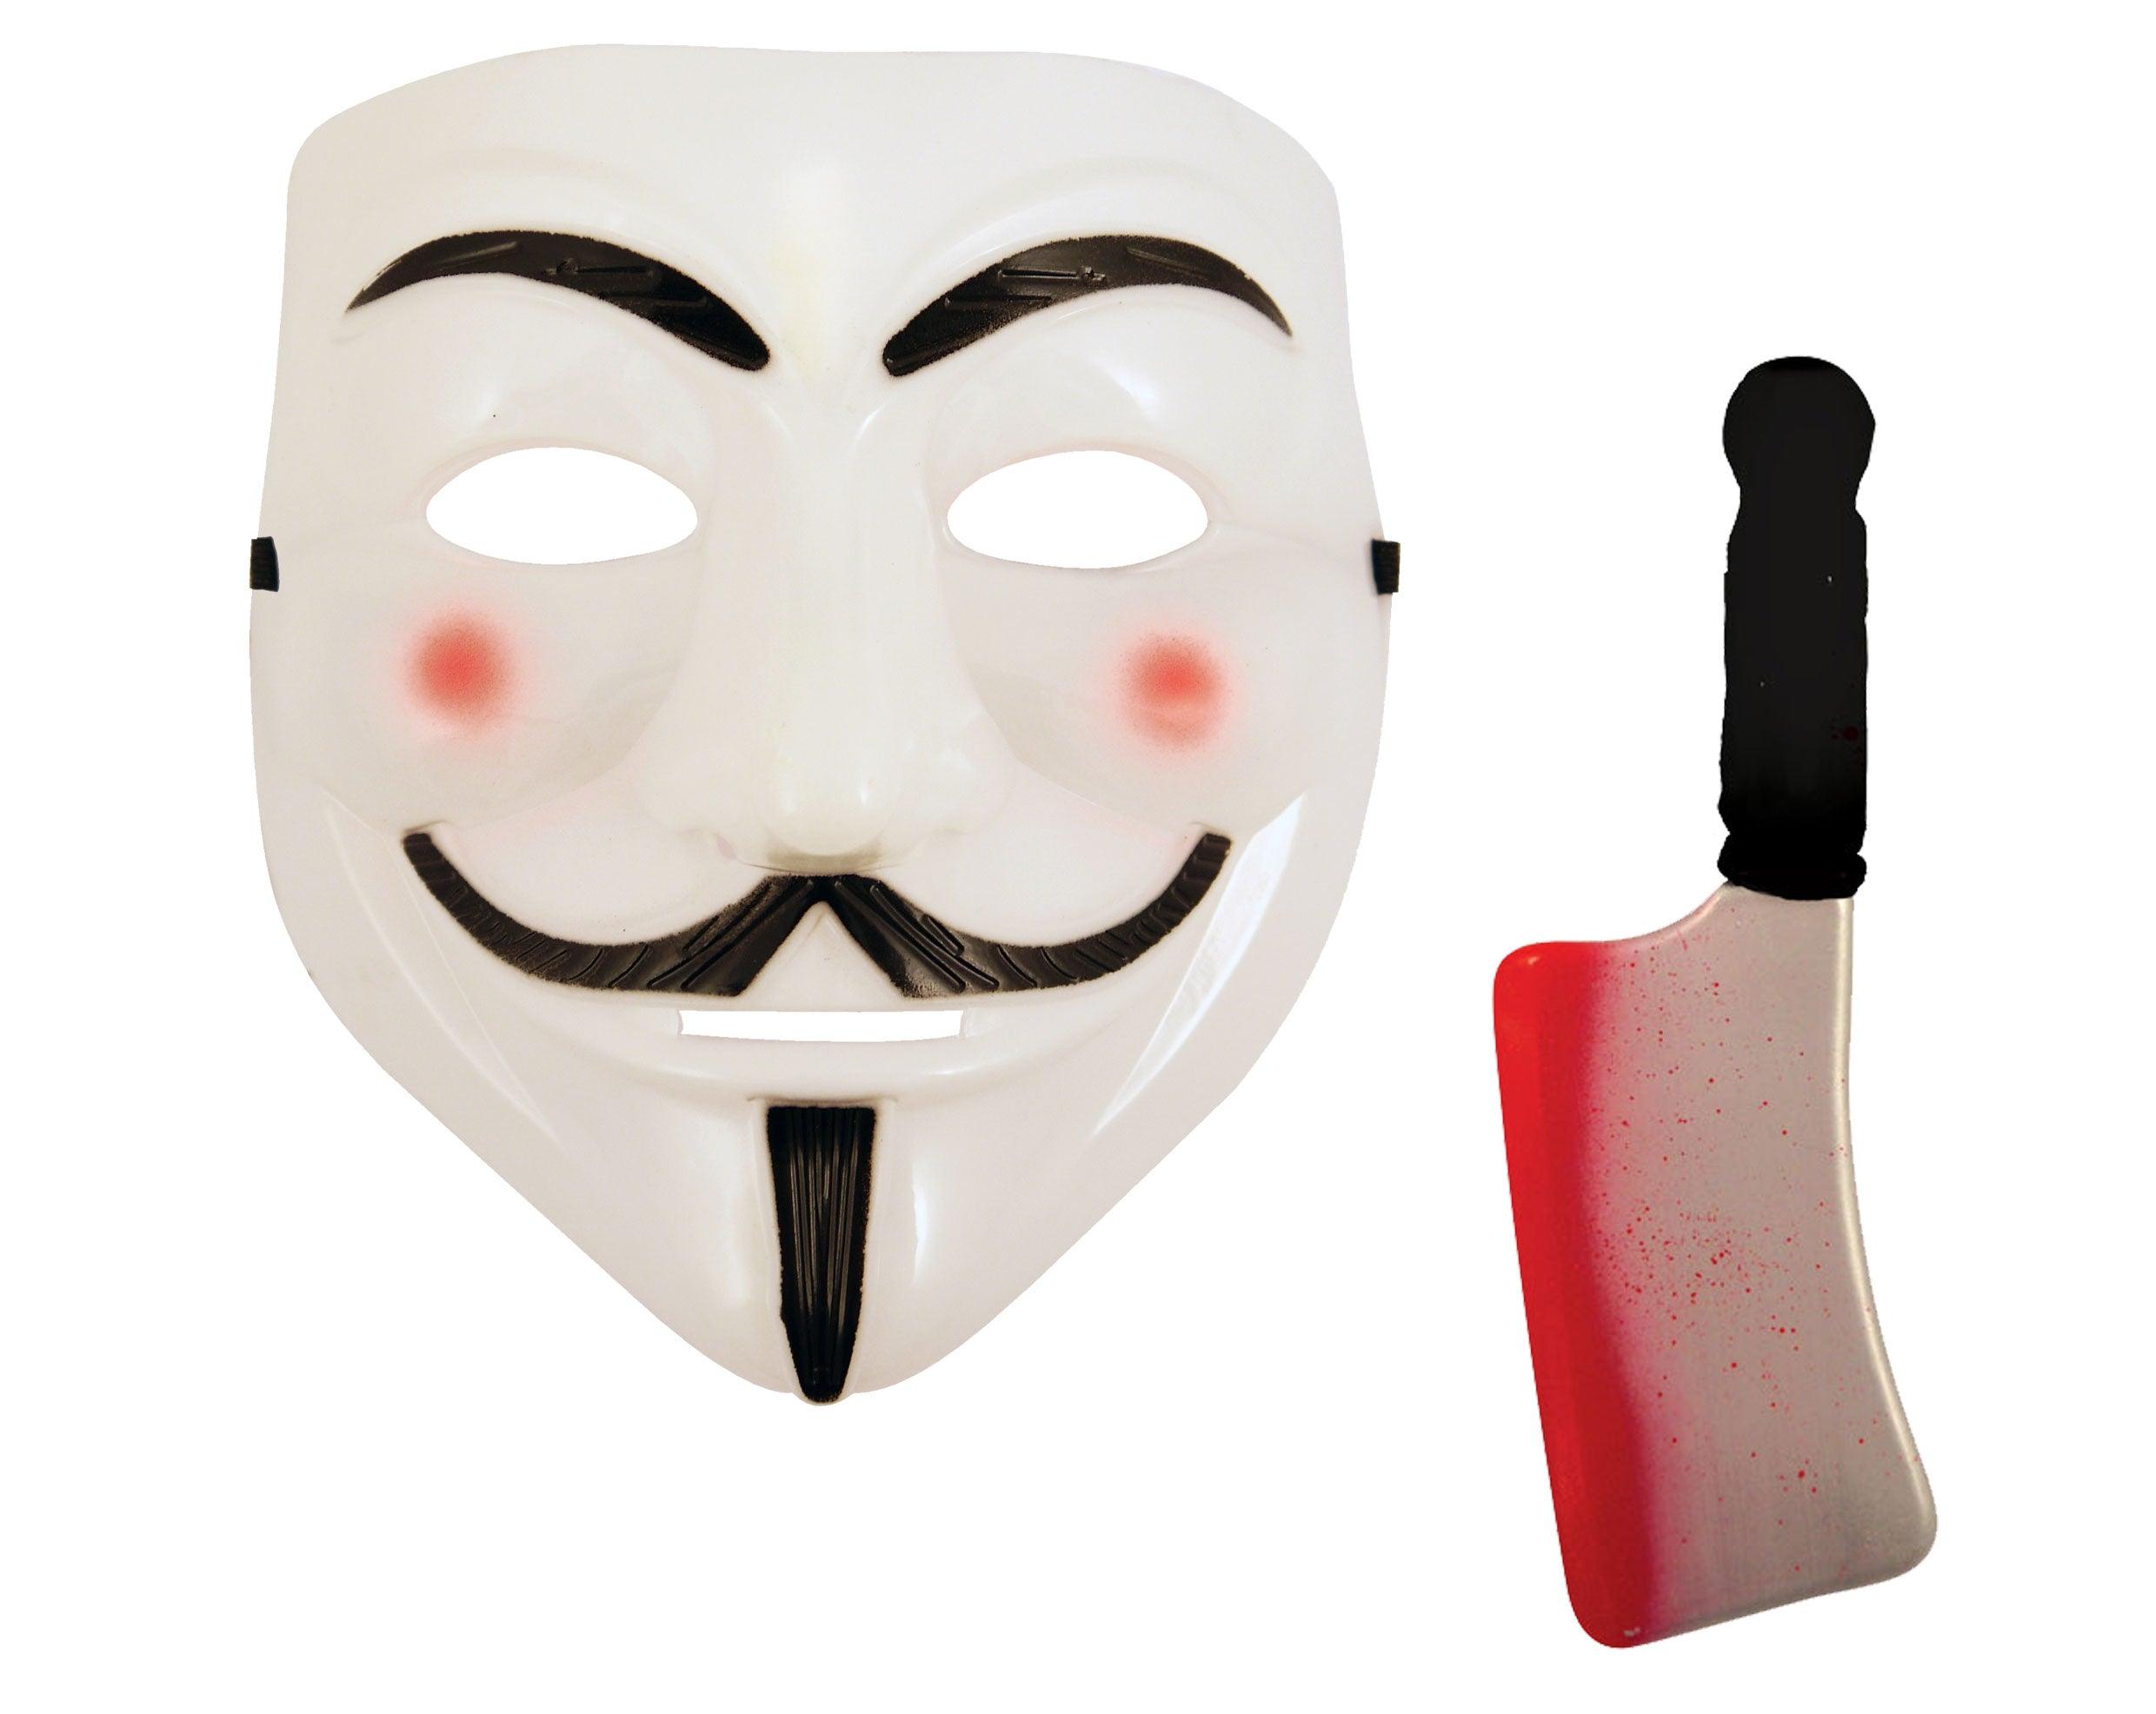 V for Vendetta Mask - Anonymous Mask Guy Fawkes Halloween Adult Scary Mask  UK